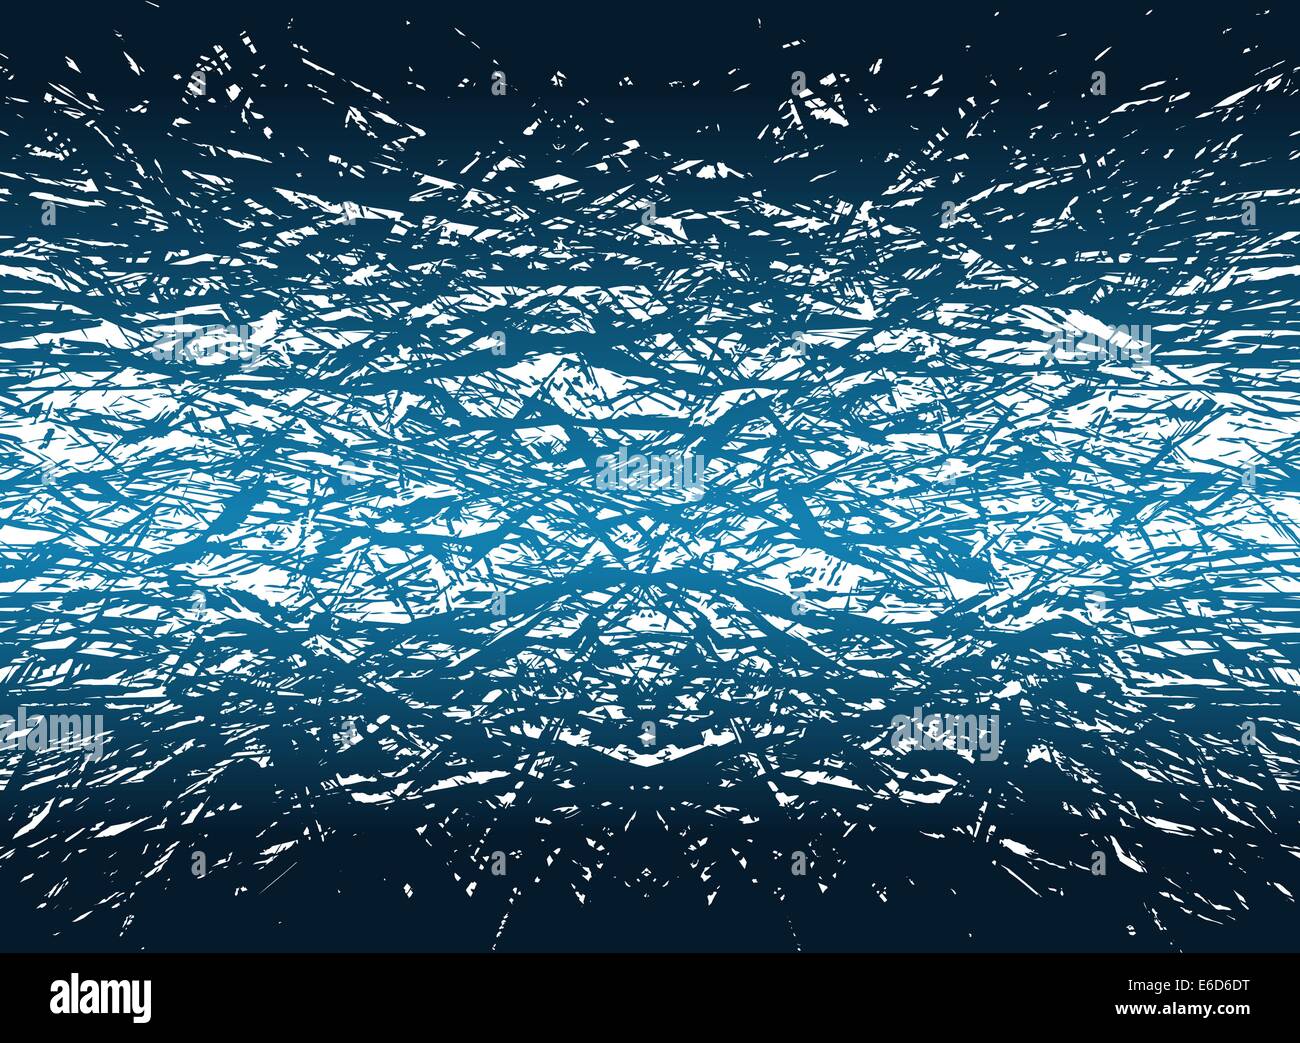 Abstract editable vector illustration of ice-ike grunge fracturing Stock Vector